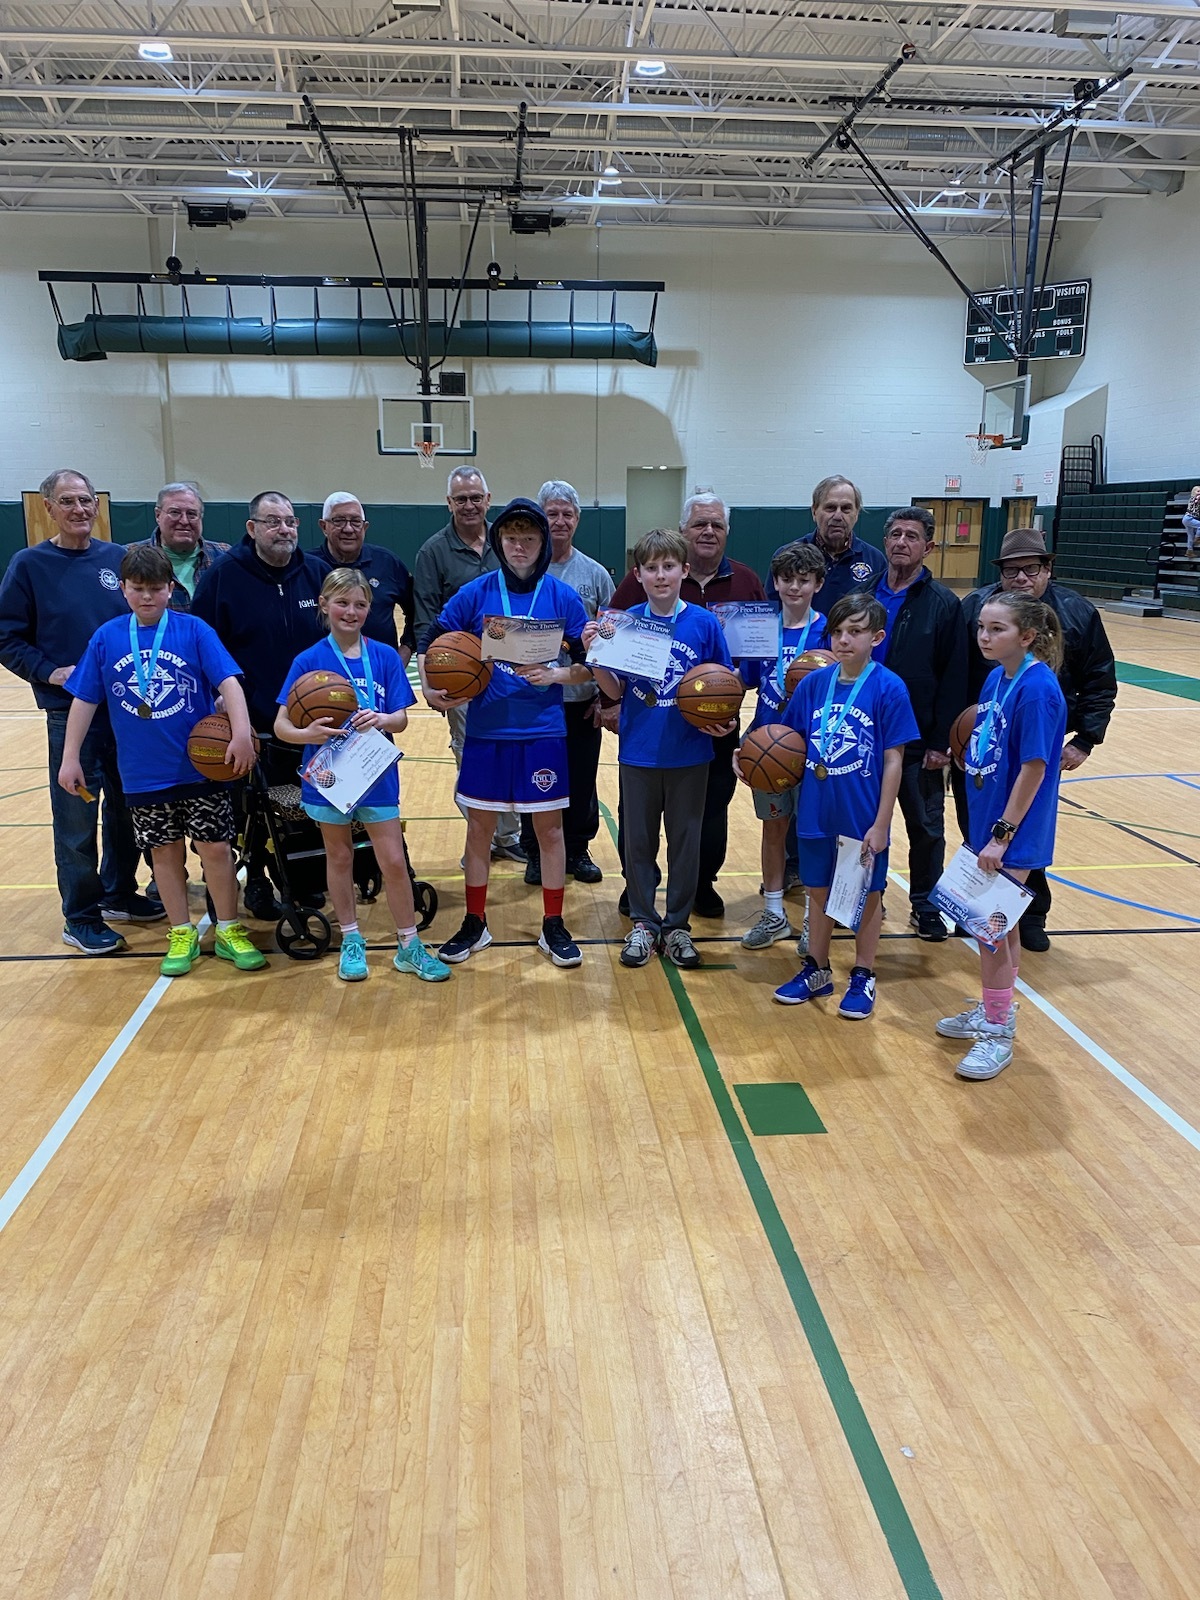 The local Knights of Columbus chapter held its annual Free Throw Contest last Friday at Westhampton Beach Middle School. The winners received a certificate,  a new basketball and a medal for their achievement, plus an invitation to compete at the next level.
The boy winners, by age, were  Brody Selig (9), Jake Krentzman (10),  Brandon Pesce (11) and Cian Belkin (12). The girl winners were  Riley Magner (10), Tierney Canty (11) and Kaitlyn Lynch (14). COURTESY KNIGHTS OF COLUMBUS